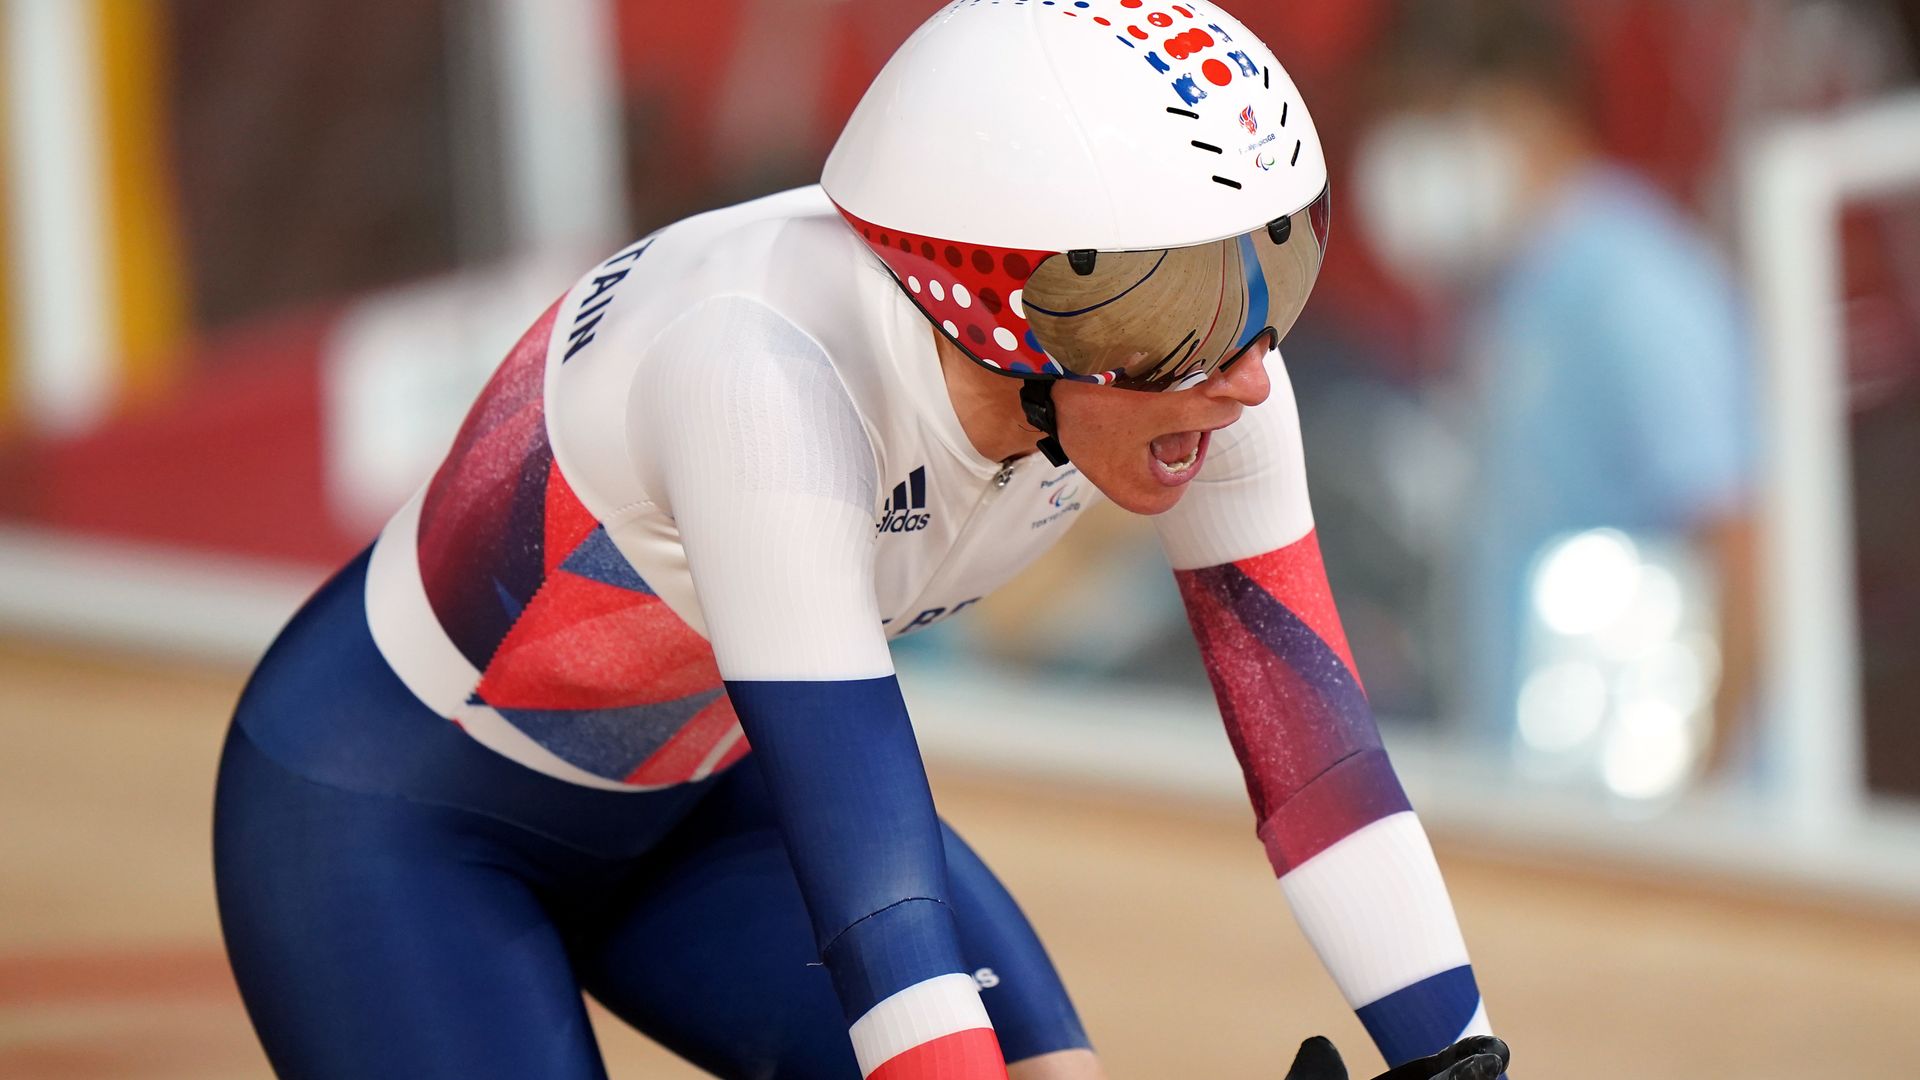 Storey wins ParalympicsGB's first gold of Games in C5 3000m pursuit